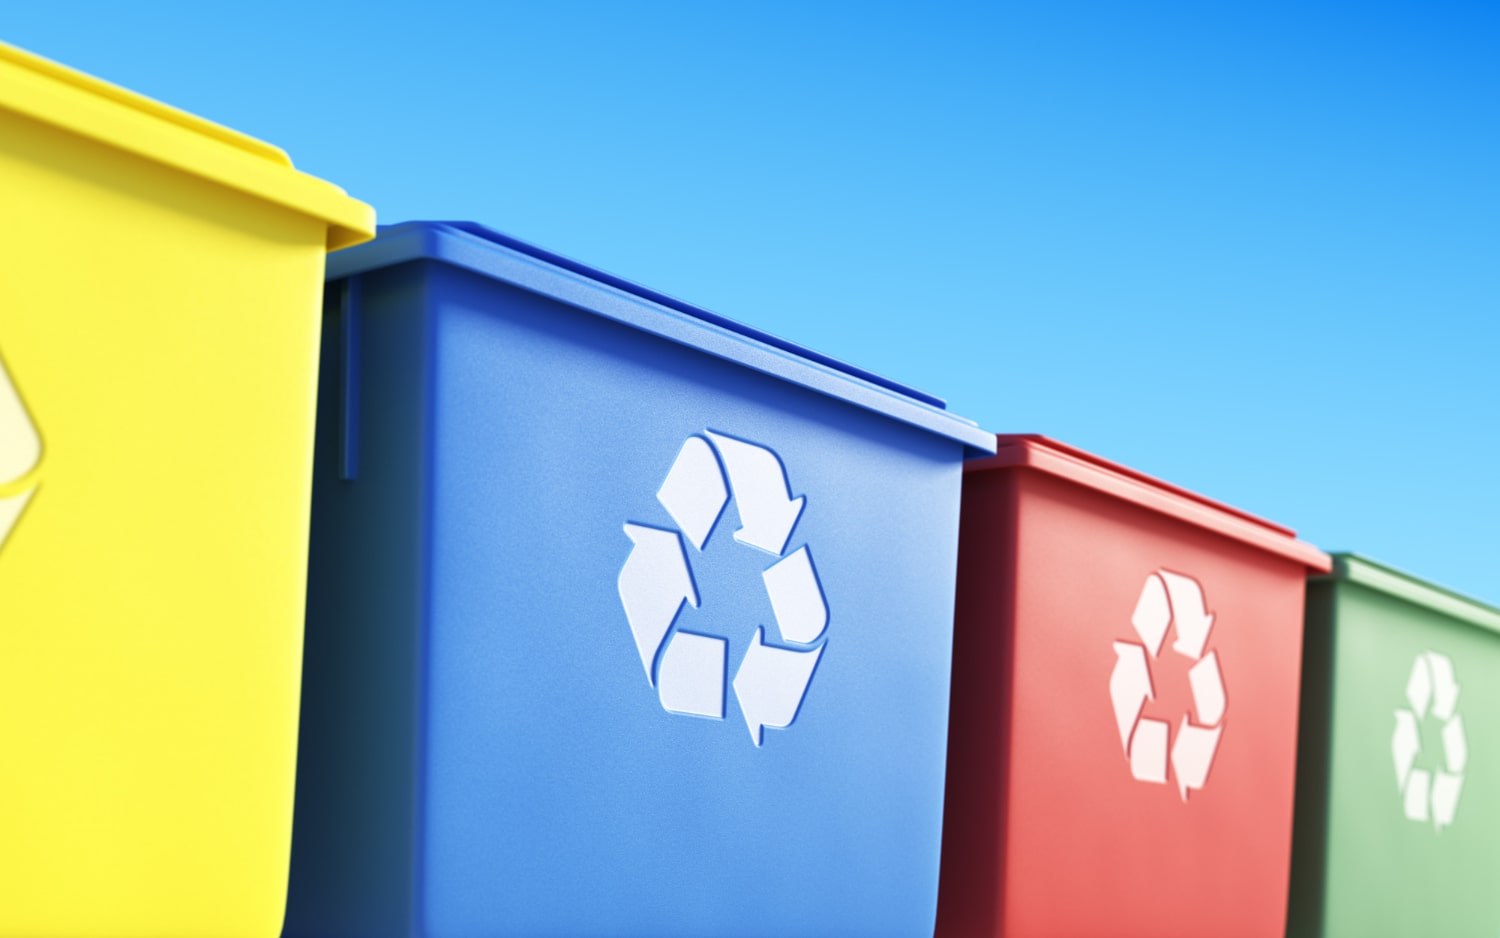 30 interesting facts about recycling